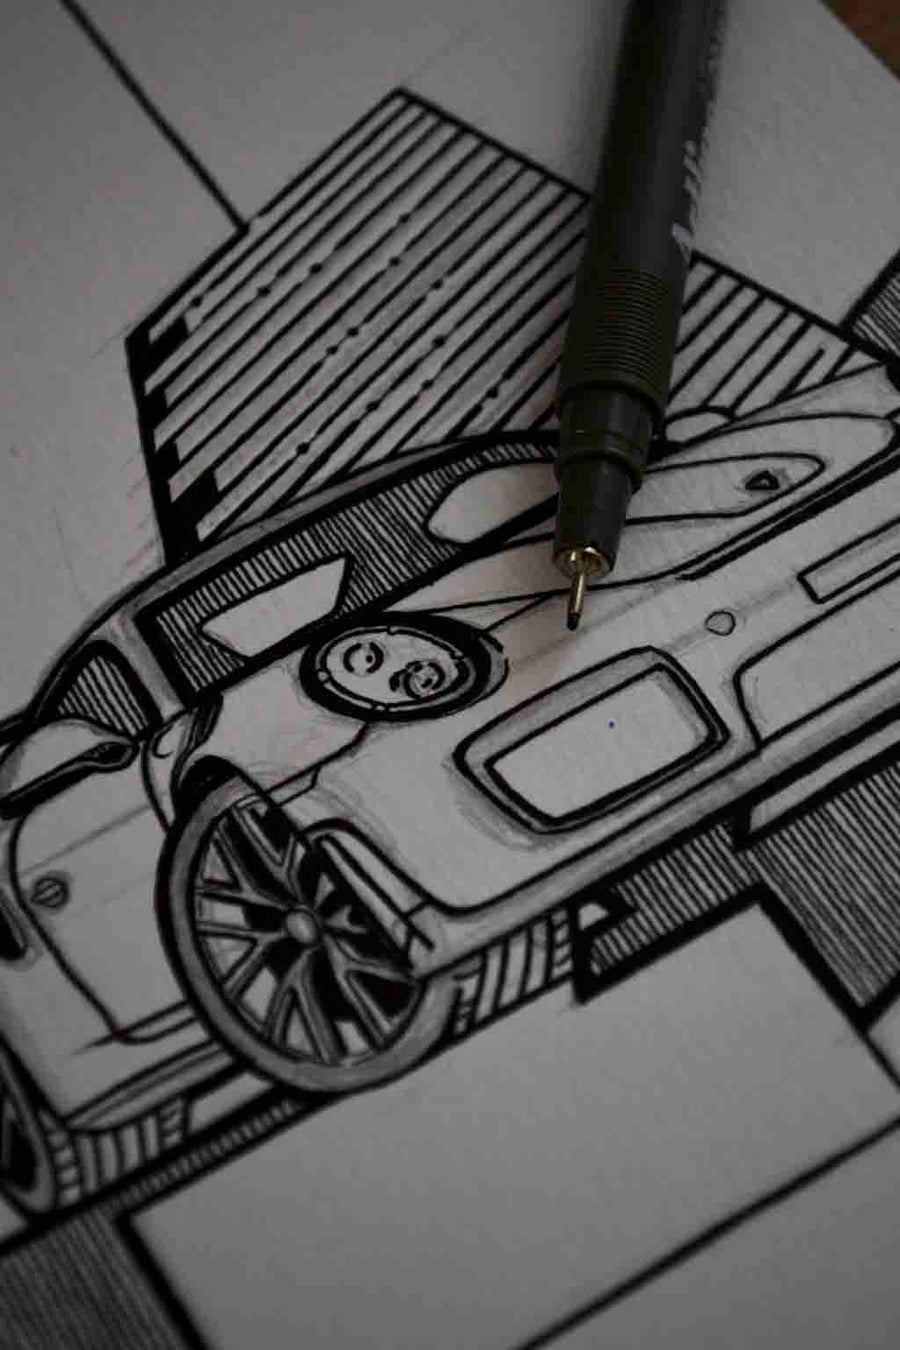 Inspiration from @mouns1104 /PORSCHE GT2 RS Handmade Artwork and Coloring Pages (Option Puzzle)